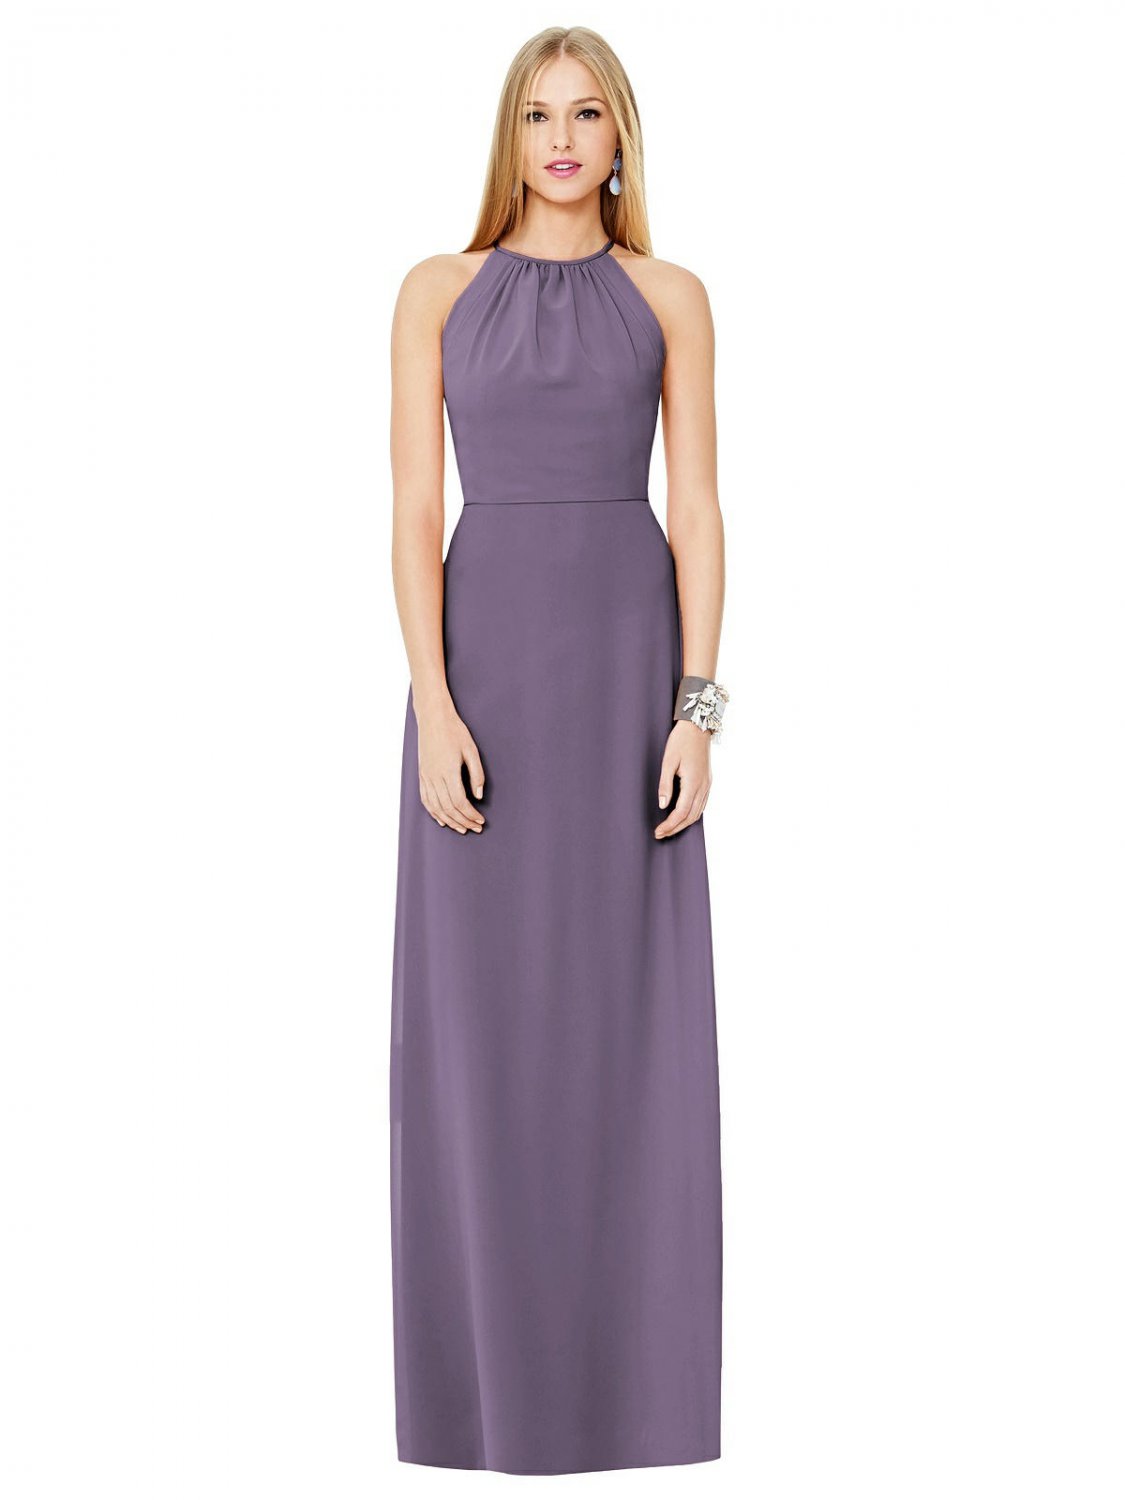 Dessy Bridesmaid / Mother of Bride Dress 8151....Lavender....Size 16..NWT